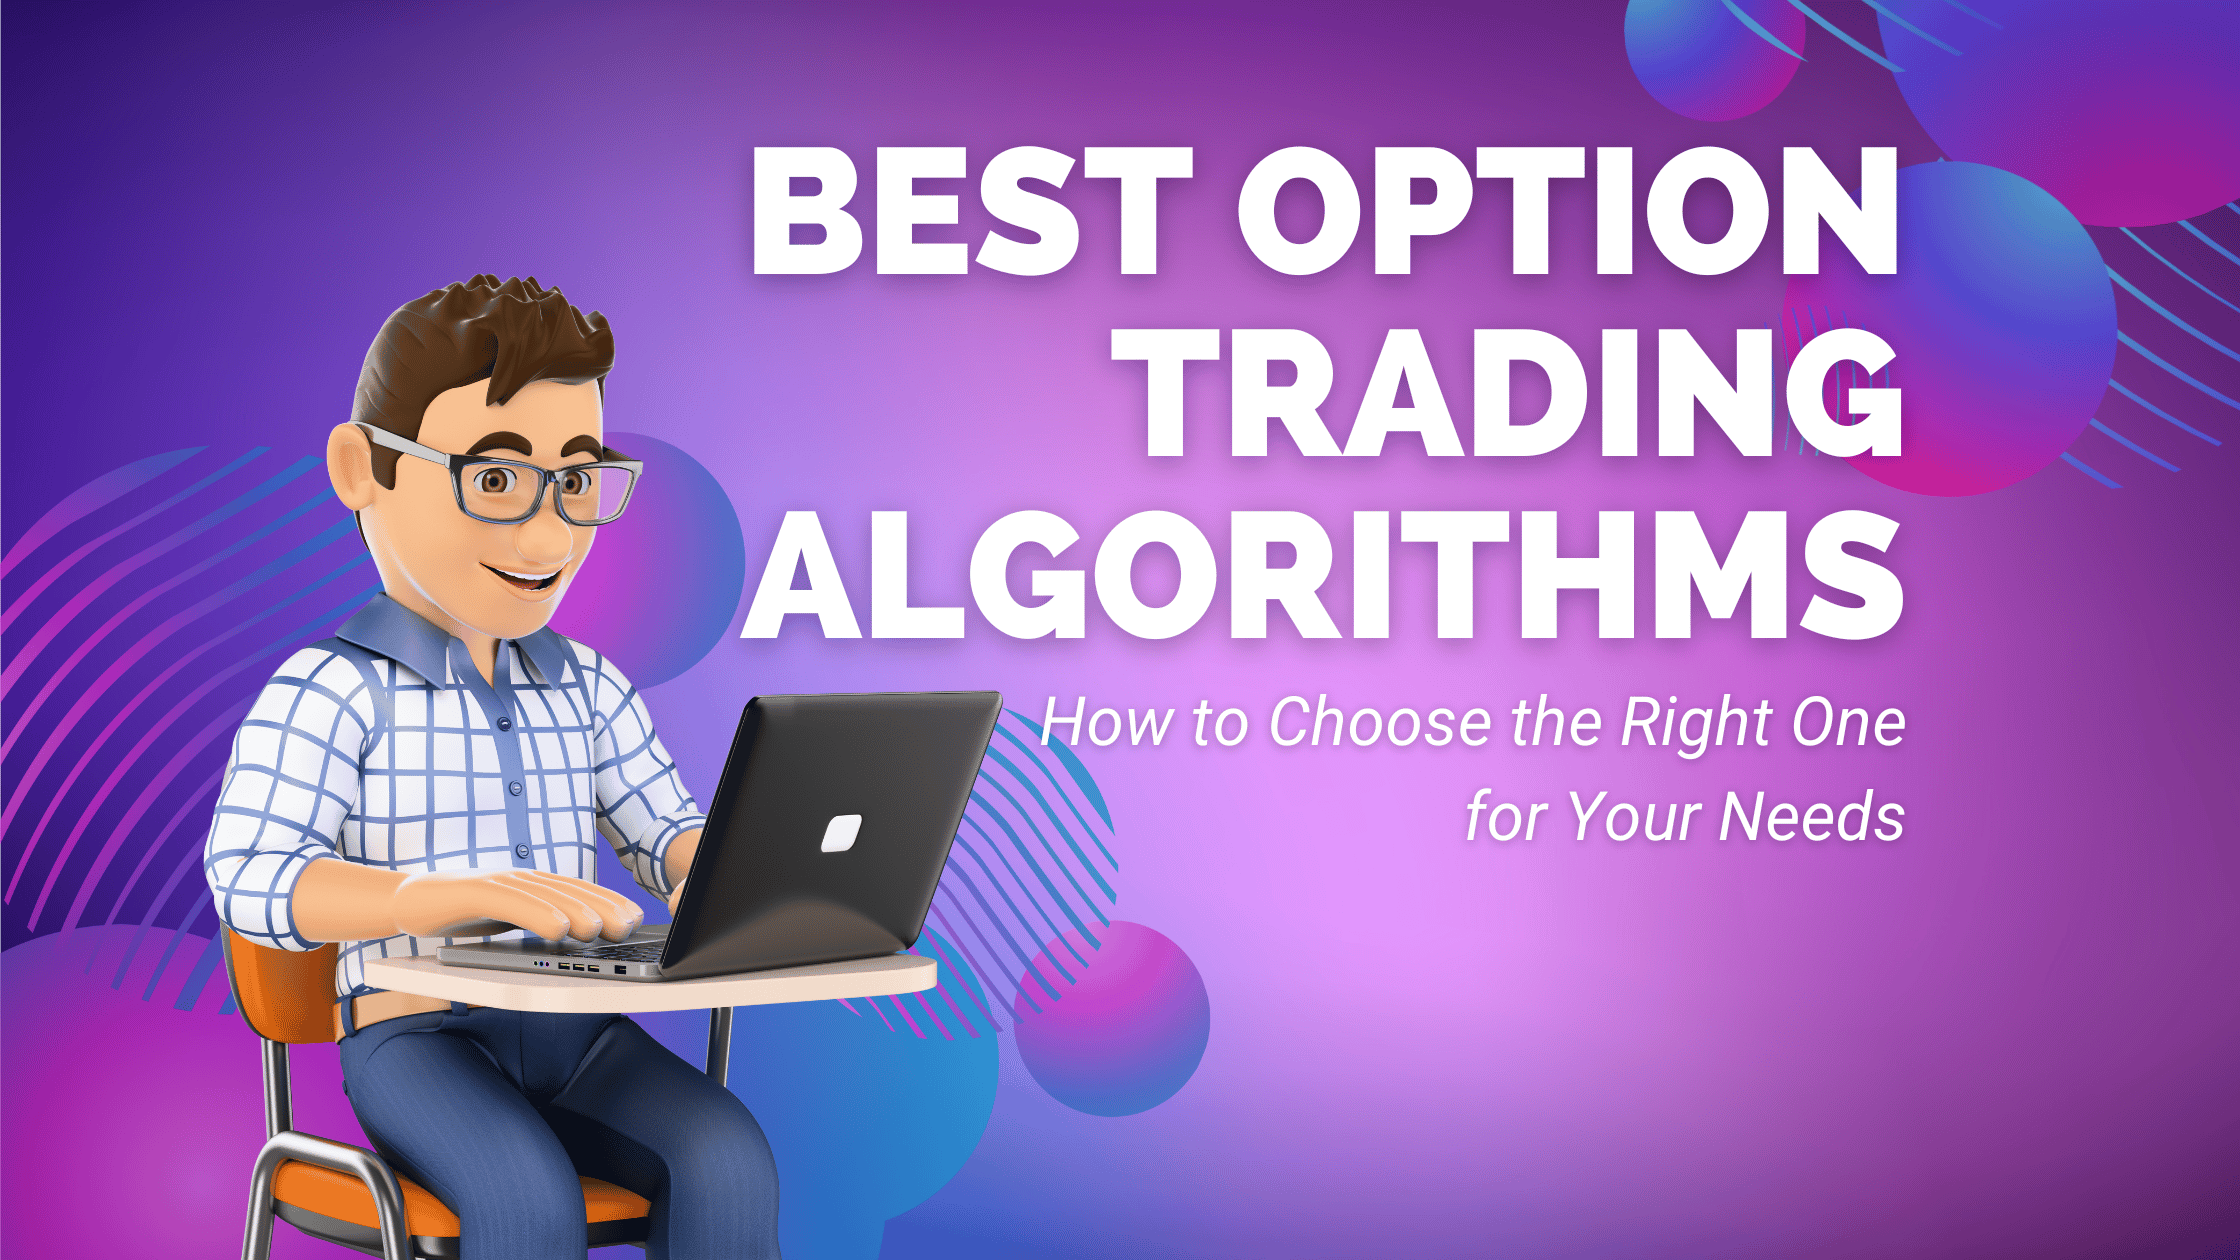 Best Option Trading Algorithms: How to Choose the Right One for Your Needs